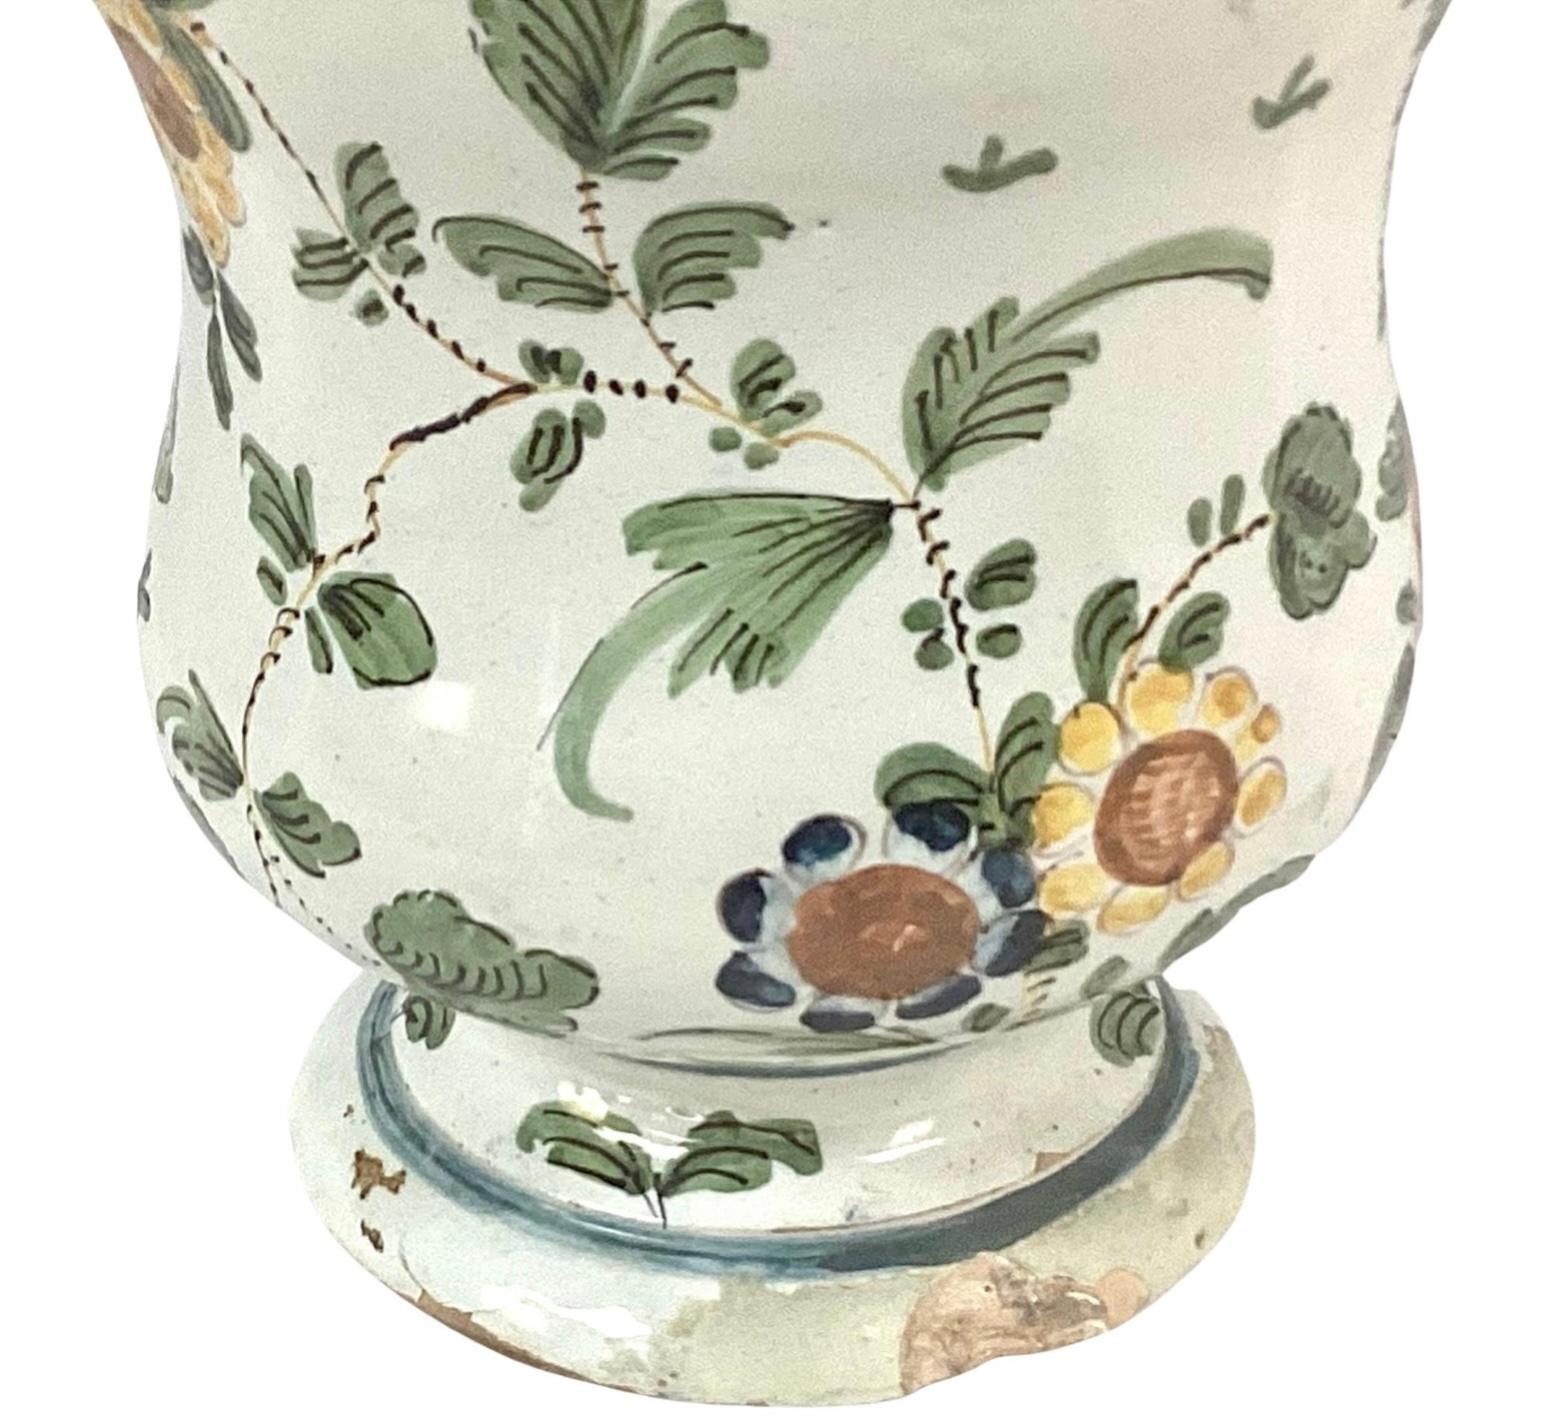 An impressive 18th century polychrome decorated drug jar or 'Albarello'.

The Albarello is of a typical waisted shape, and is decorated profusely in polychrome. The body of the jar is decorated with brightly colored polychrome of yellow, green and